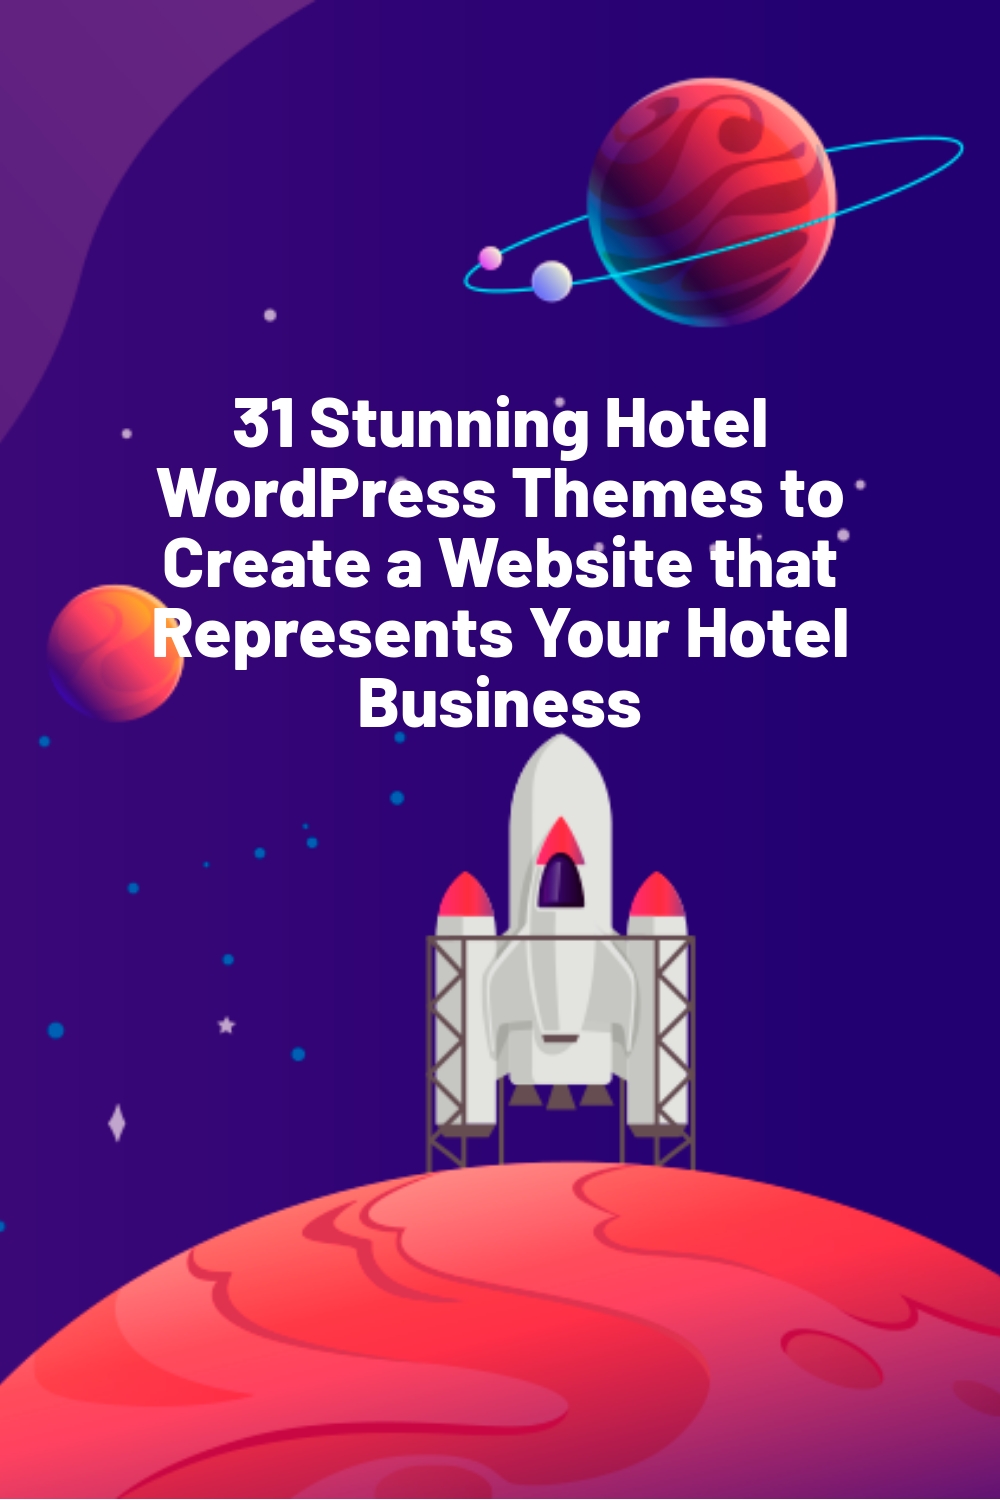 31 Stunning Hotel WordPress Themes to Create a Website that Represents Your Hotel Business